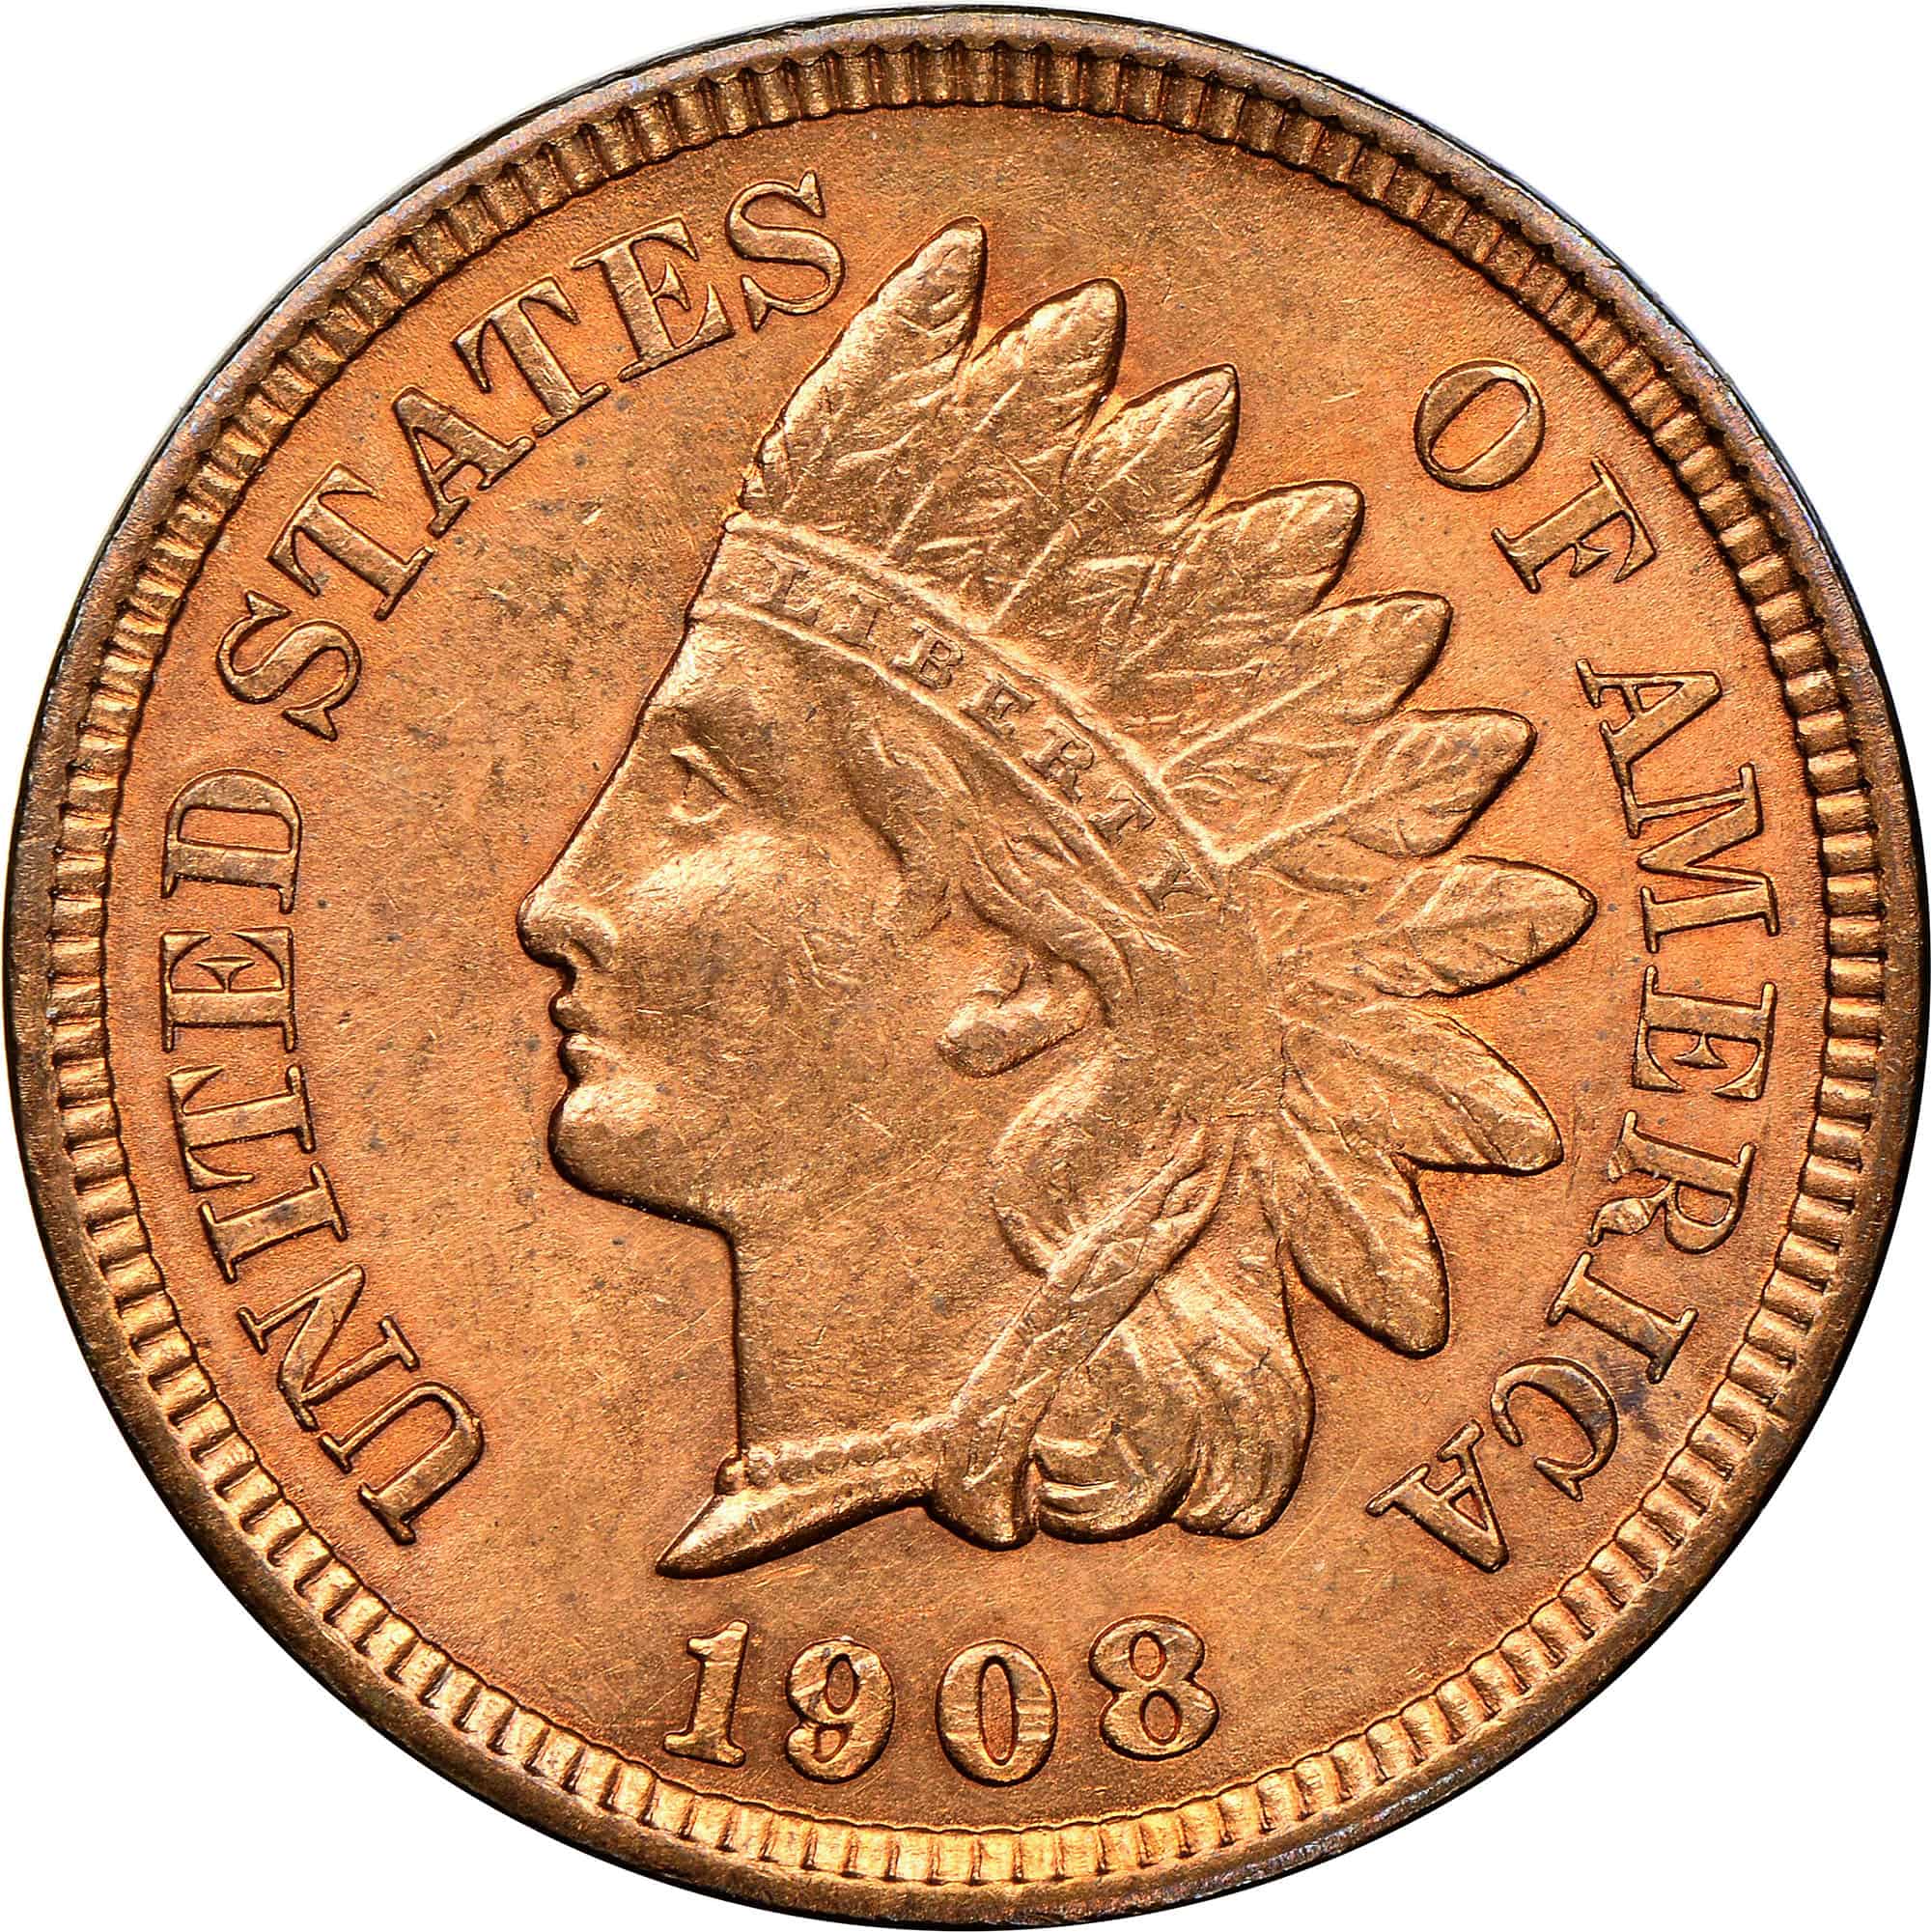 The Obverse of the 1908 Indian Head Penny